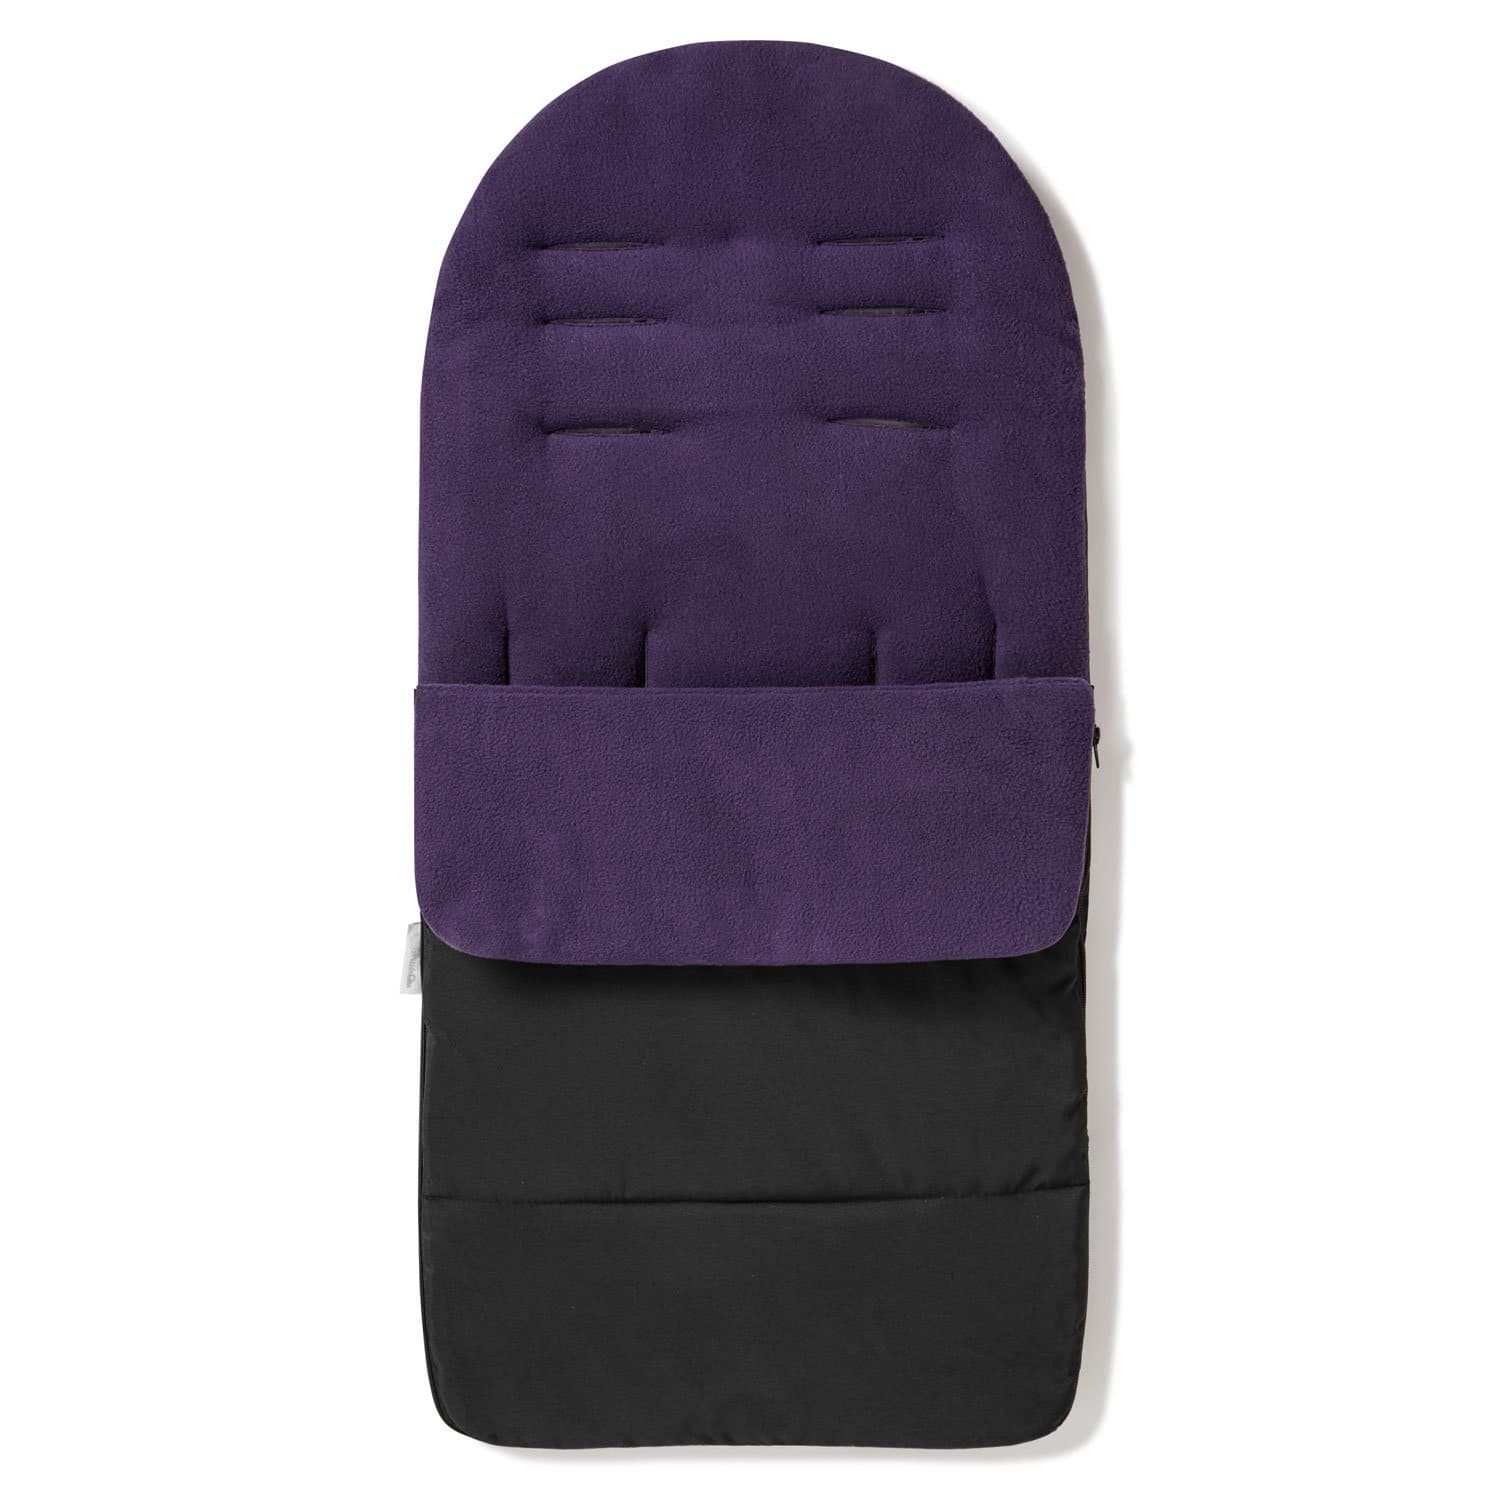 Premium Footmuff / Cosy Toes Compatible with Zooper - Plum Purple / Fits All Models | For Your Little One